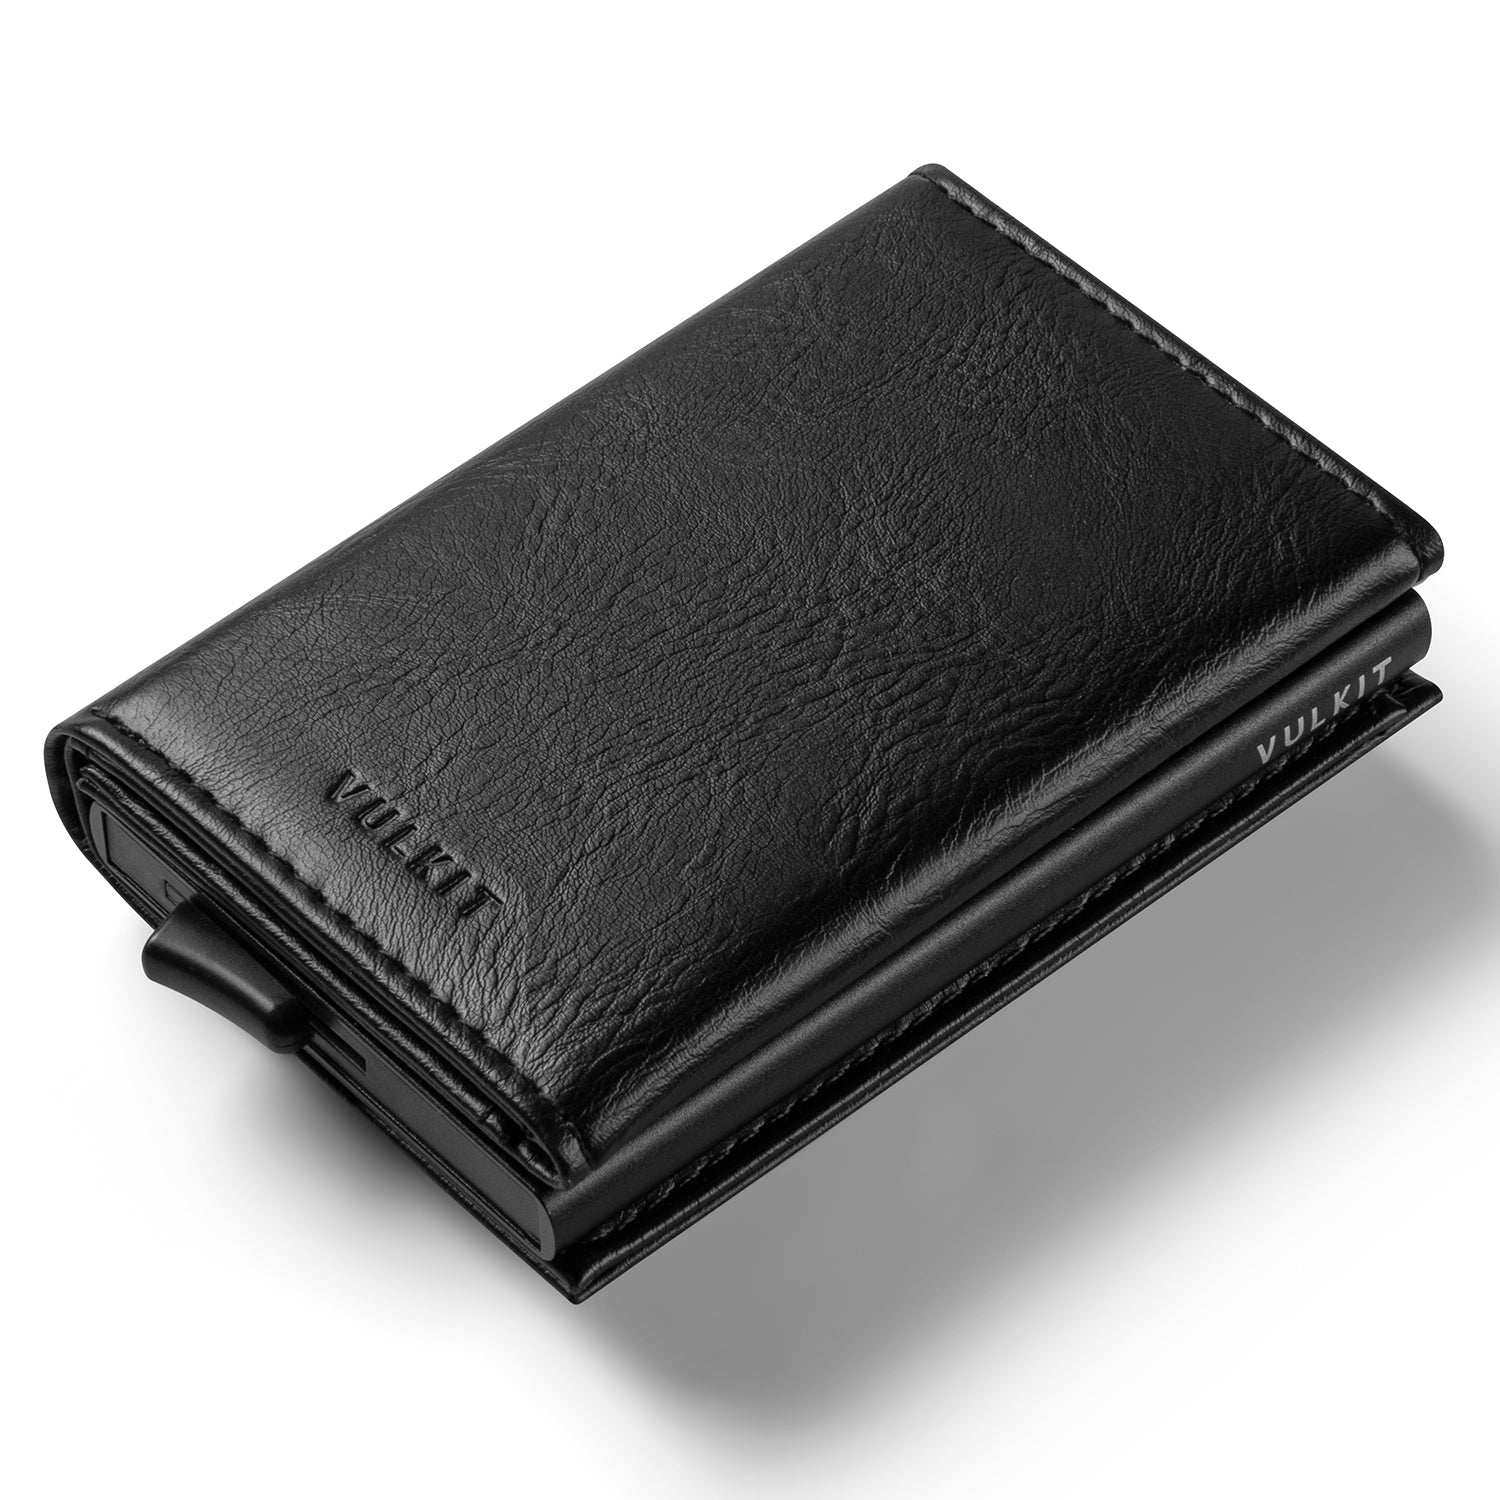 Exclusive Slim Wallet With Coin Pocket and Photo Holder – VreLuxe